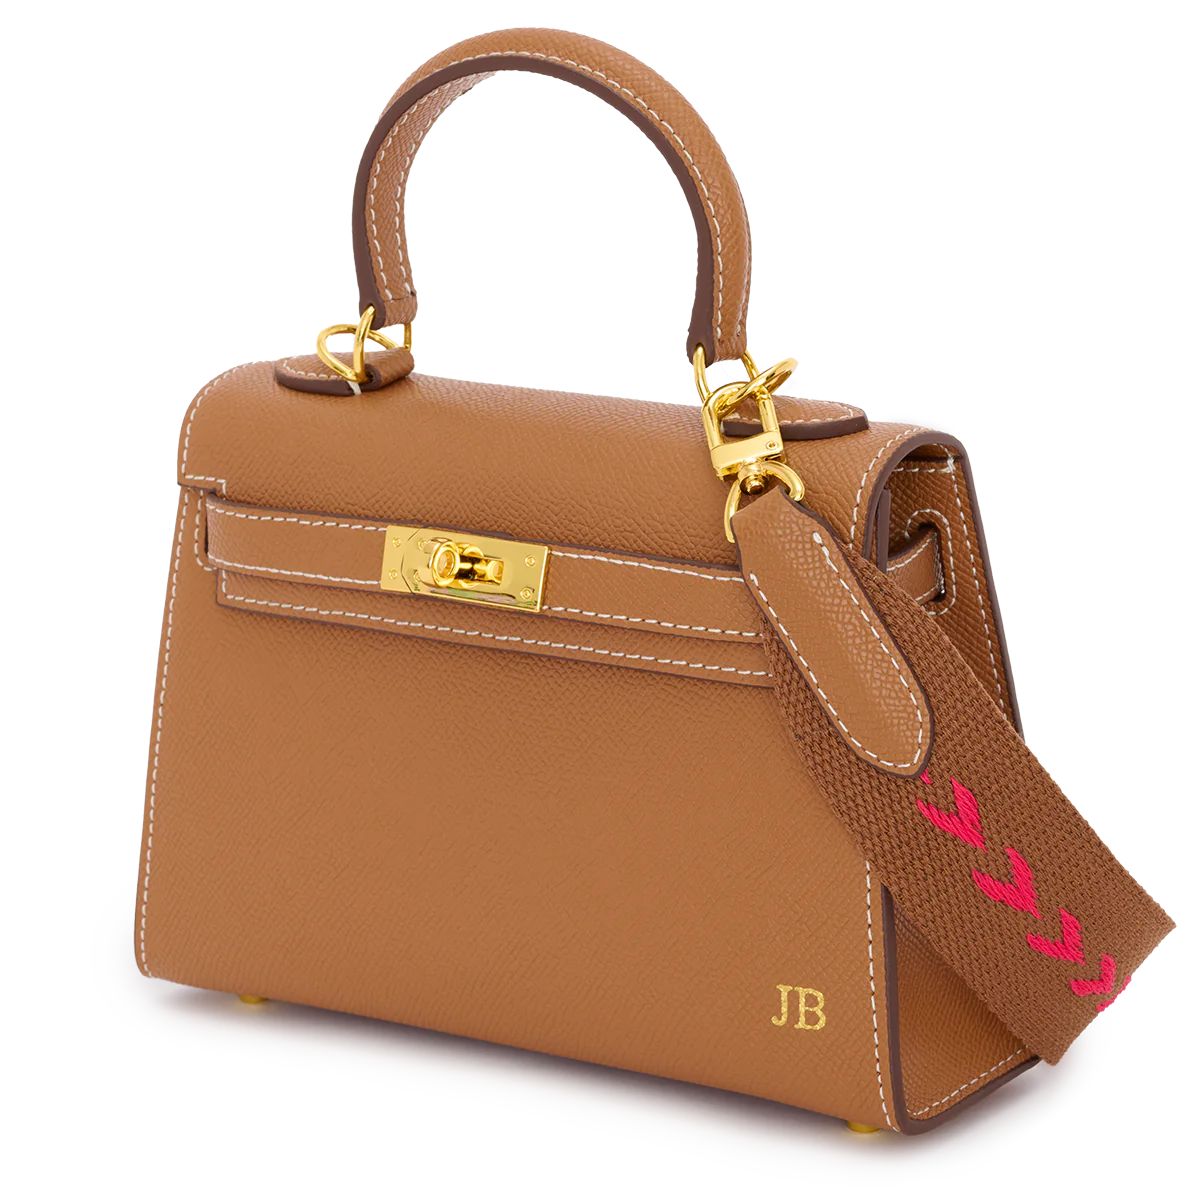 Lily & Bean Hettie Mini Bag - Tan with Initials & fabric Patterned Str | Lily and Bean